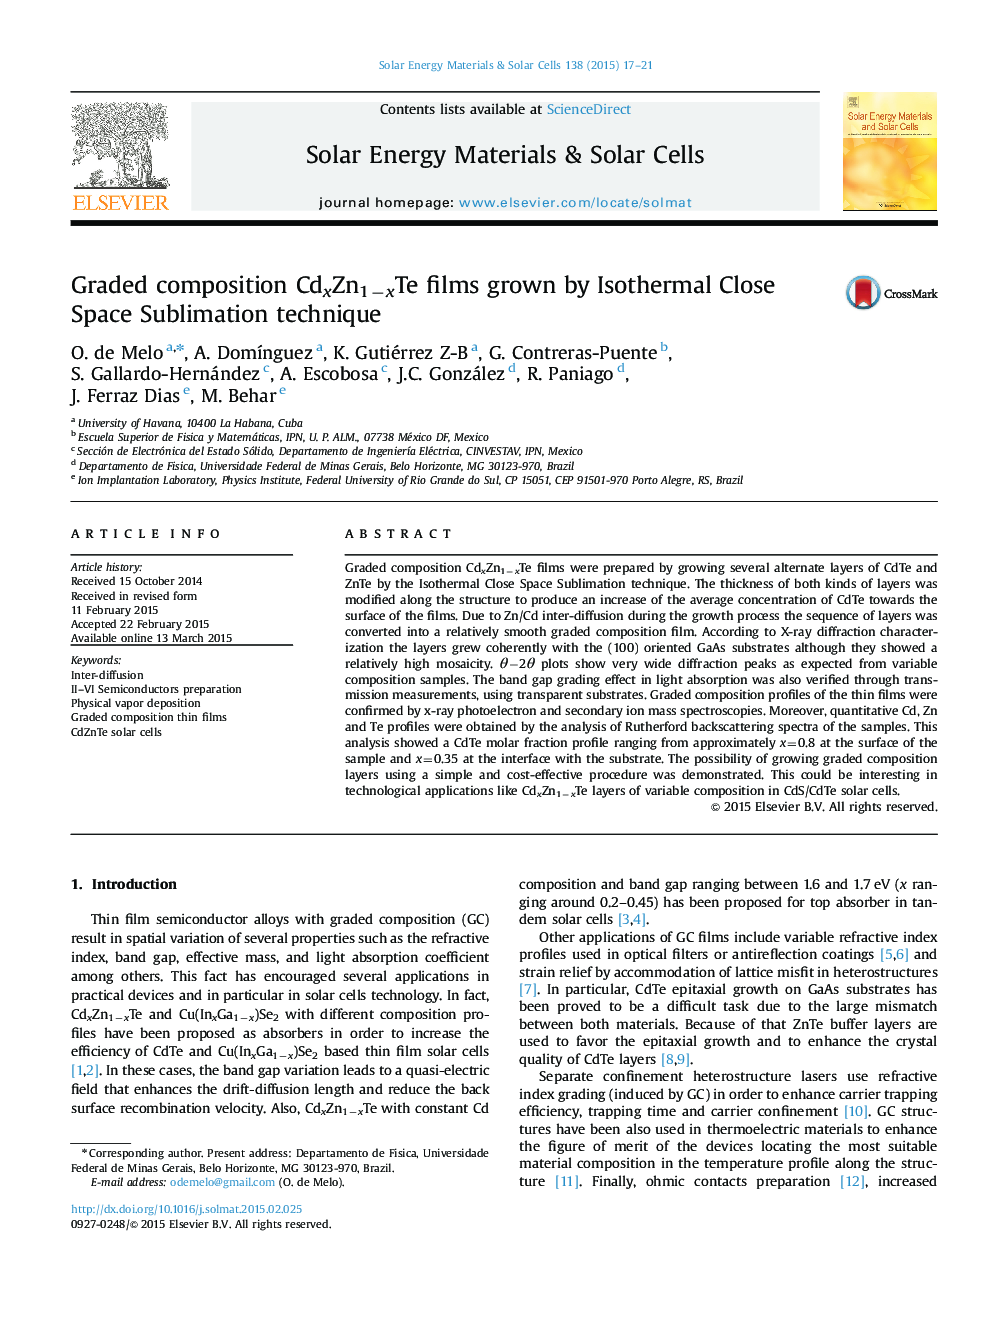 Graded composition CdxZn1−xTe films grown by Isothermal Close Space Sublimation technique